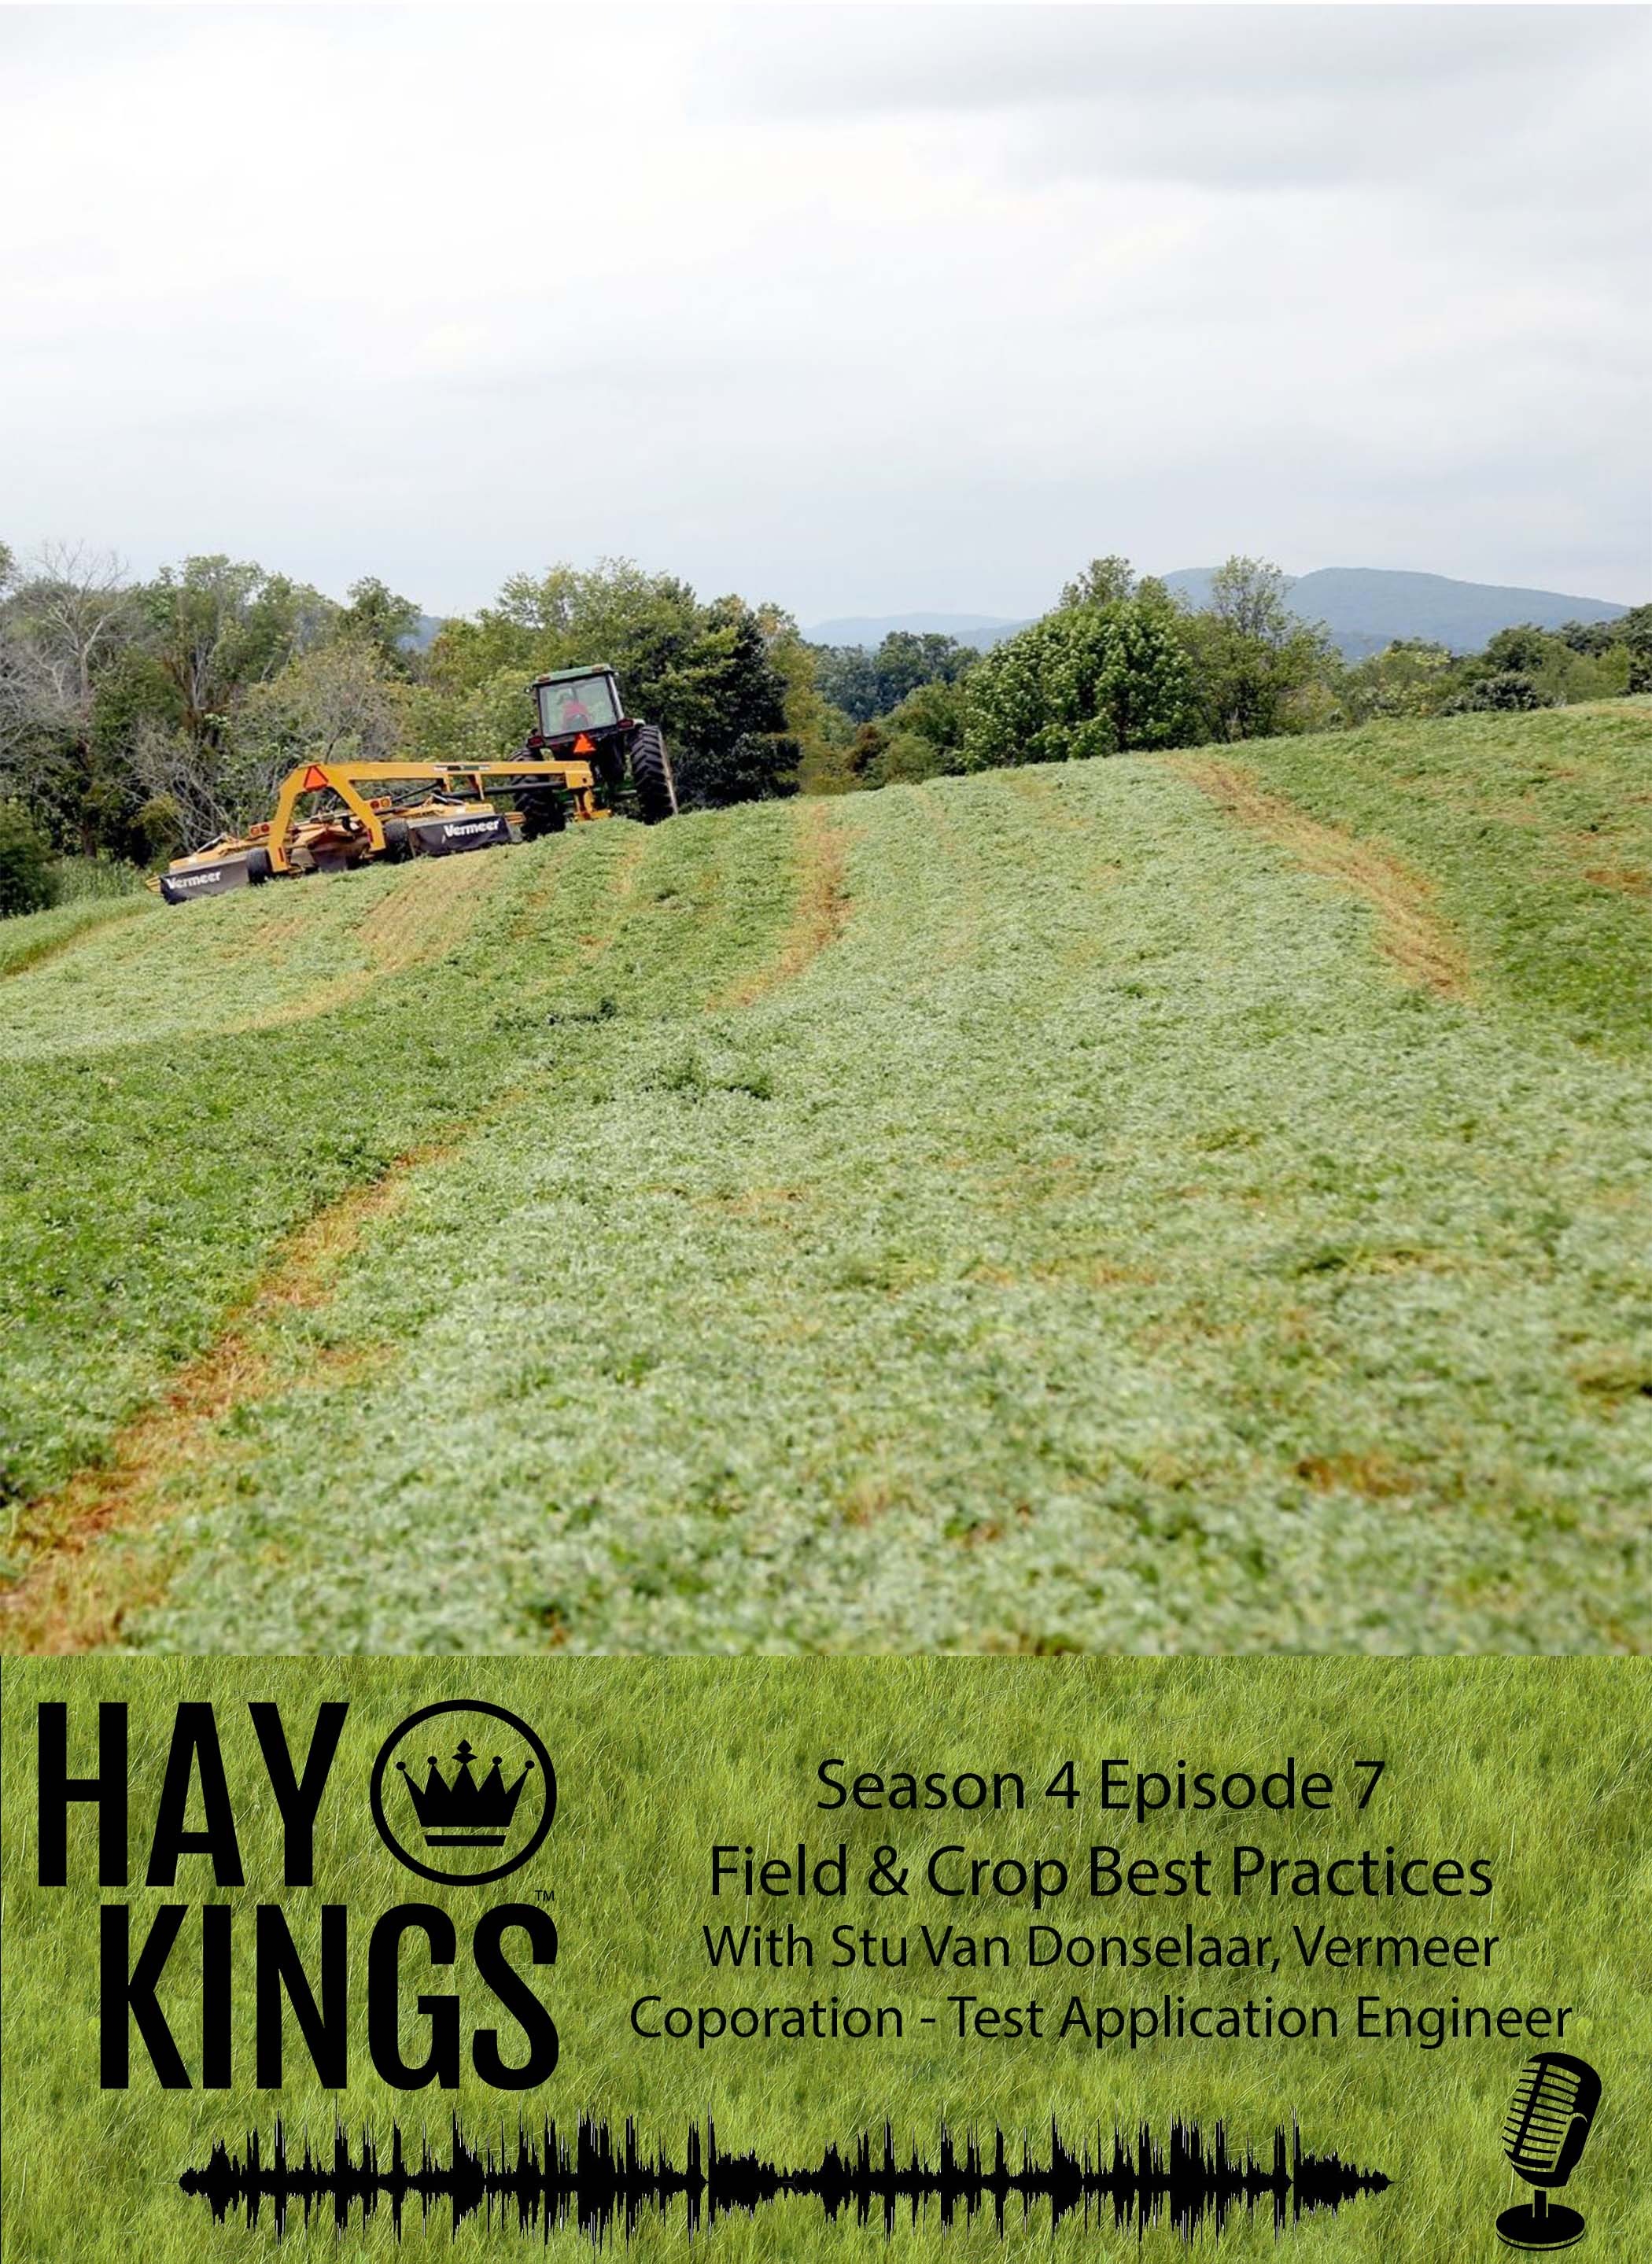 Hay Kings Podcast: Field and Crop Best Practices (S4:E7)